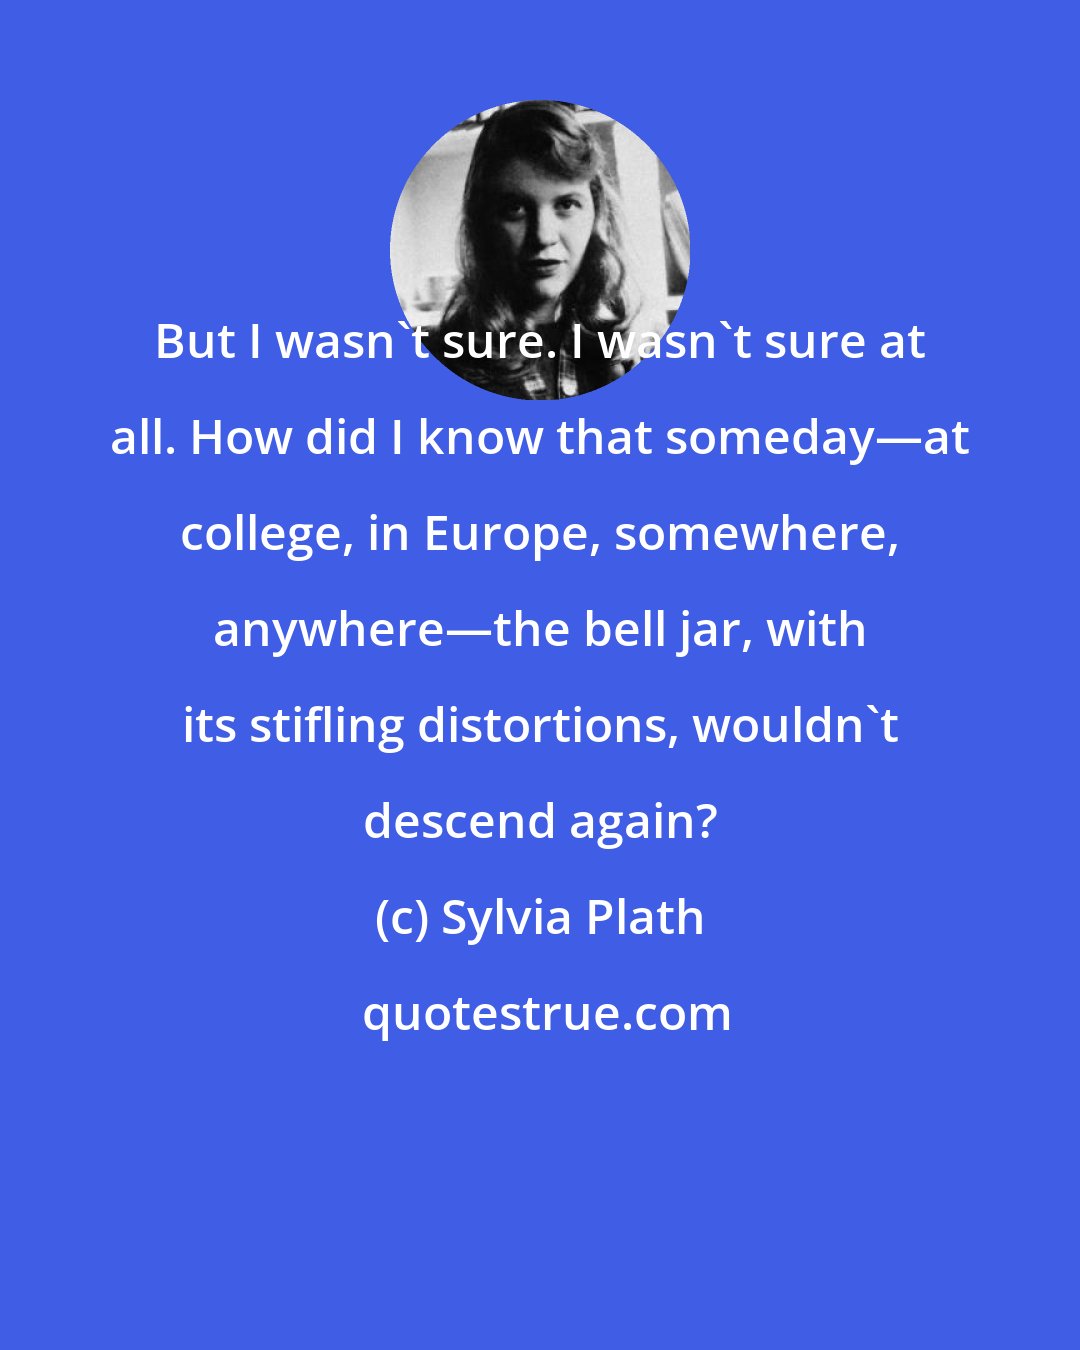 Sylvia Plath: But I wasn't sure. I wasn't sure at all. How did I know that someday―at college, in Europe, somewhere, anywhere―the bell jar, with its stifling distortions, wouldn't descend again?